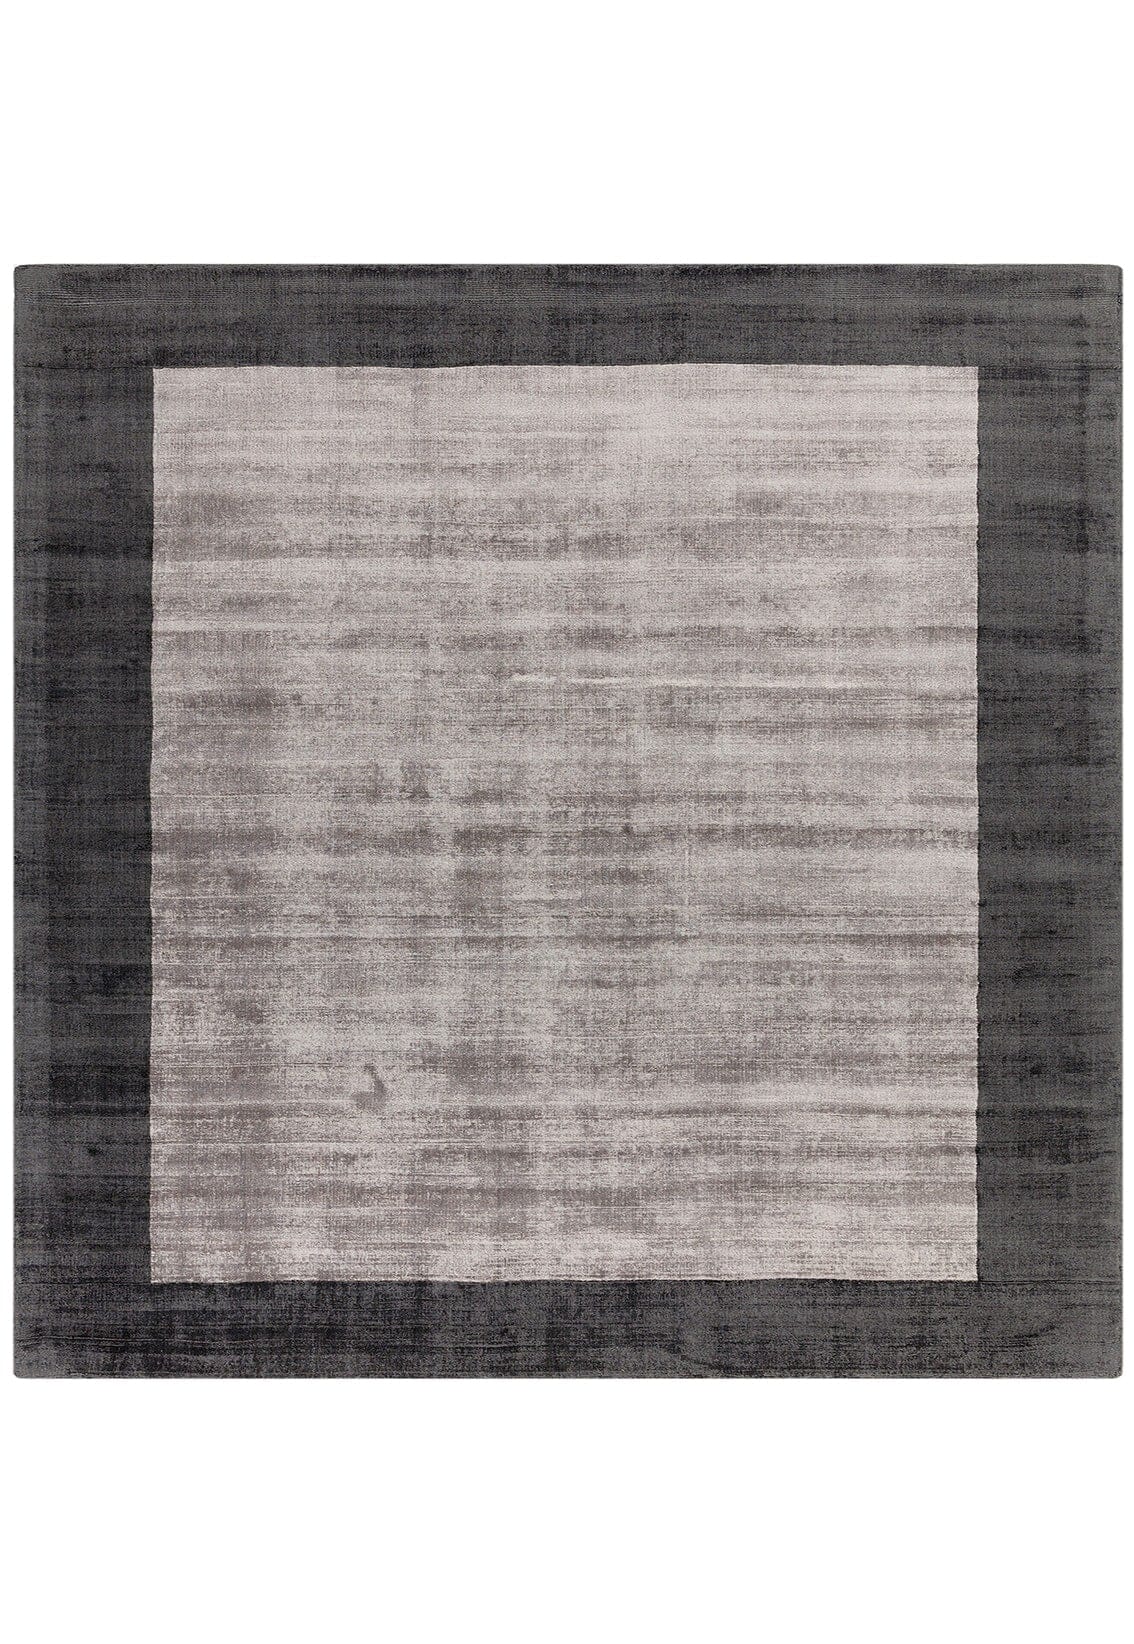  Asiatic Carpets-Asiatic Carpets Blade Hand Woven Rug Charcoal Silver - 200 x 290cm-Grey, Silver 821 